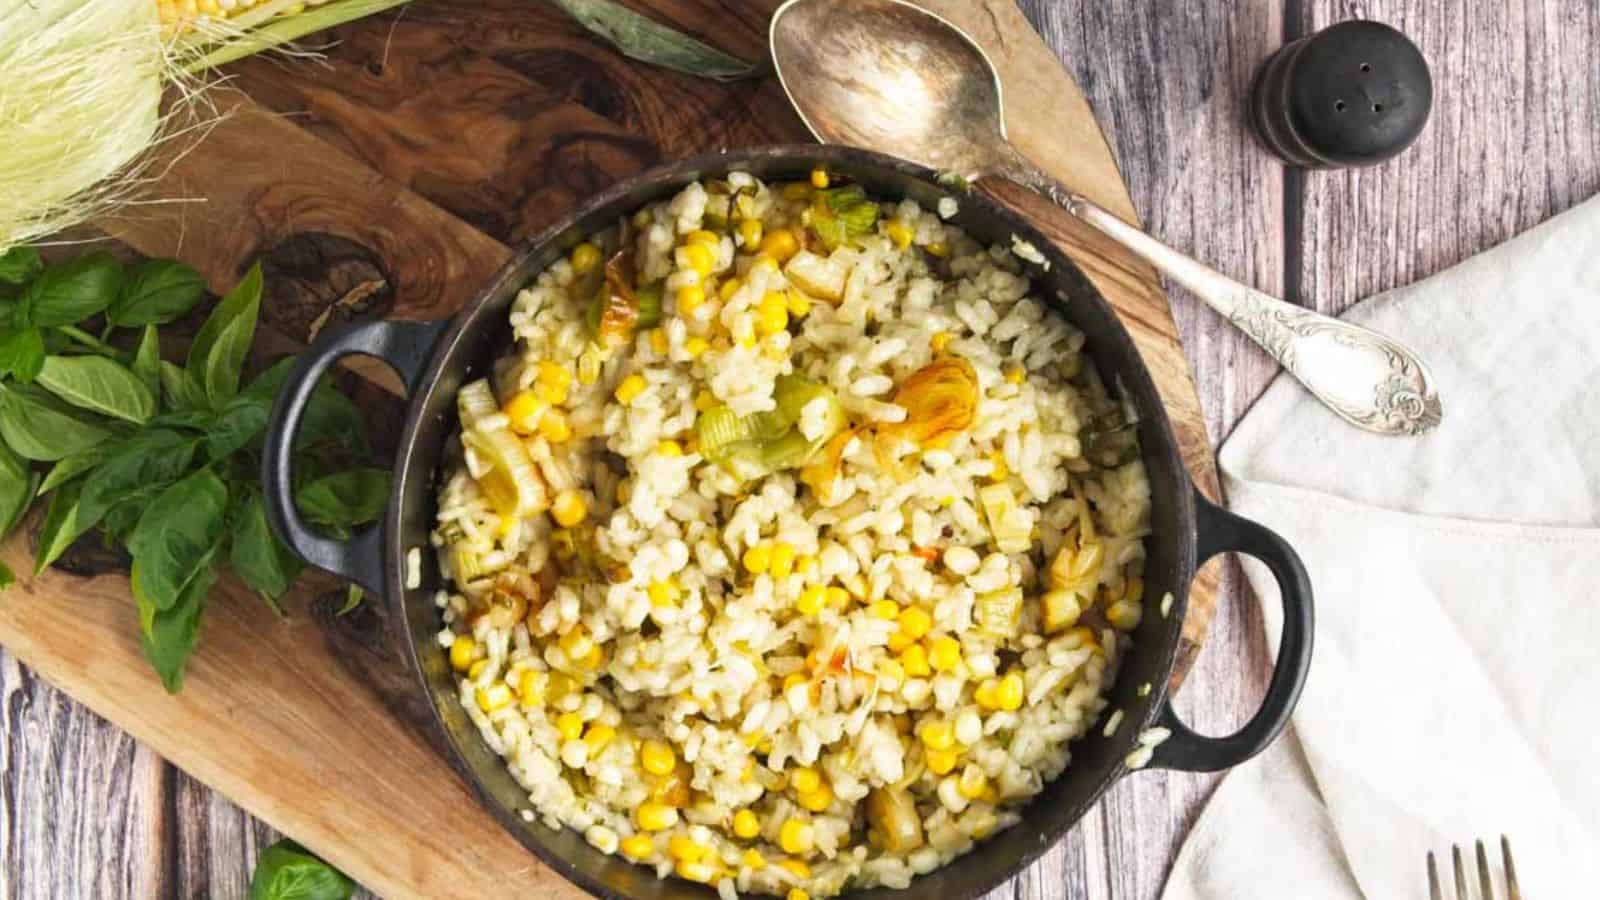 <p>Shake up your dinner routine with Sweet Corn and Leek Risotto, a creamy and comforting dish that blends the sweetness of corn with the mild, onion-like flavor of leeks. This risotto is a warm bowl of comfort, luxuriously showcasing simple ingredients. It’s perfect for those evenings when you crave something hearty yet sophisticated.<br><strong>Get the Recipe: </strong><a href="https://twocityvegans.com/sweet-corn-leek-risotto/?utm_source=msn&utm_medium=page&utm_campaign=msn">Sweet Corn and Leek Risotto</a></p>